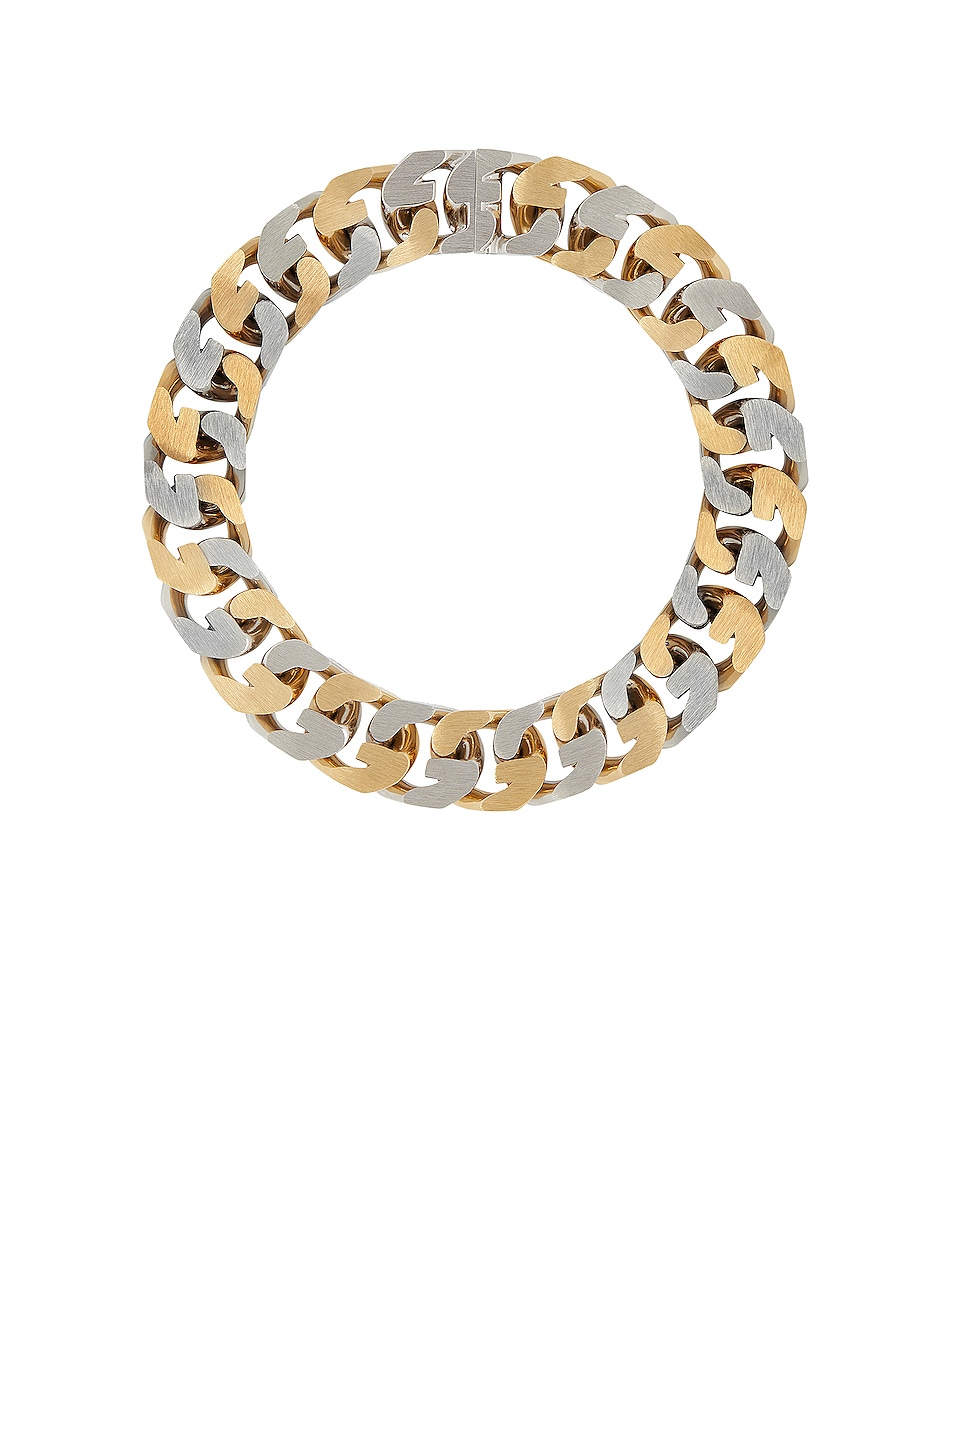 Givenchy G Chain Medium Necklace in Gold | FWRD